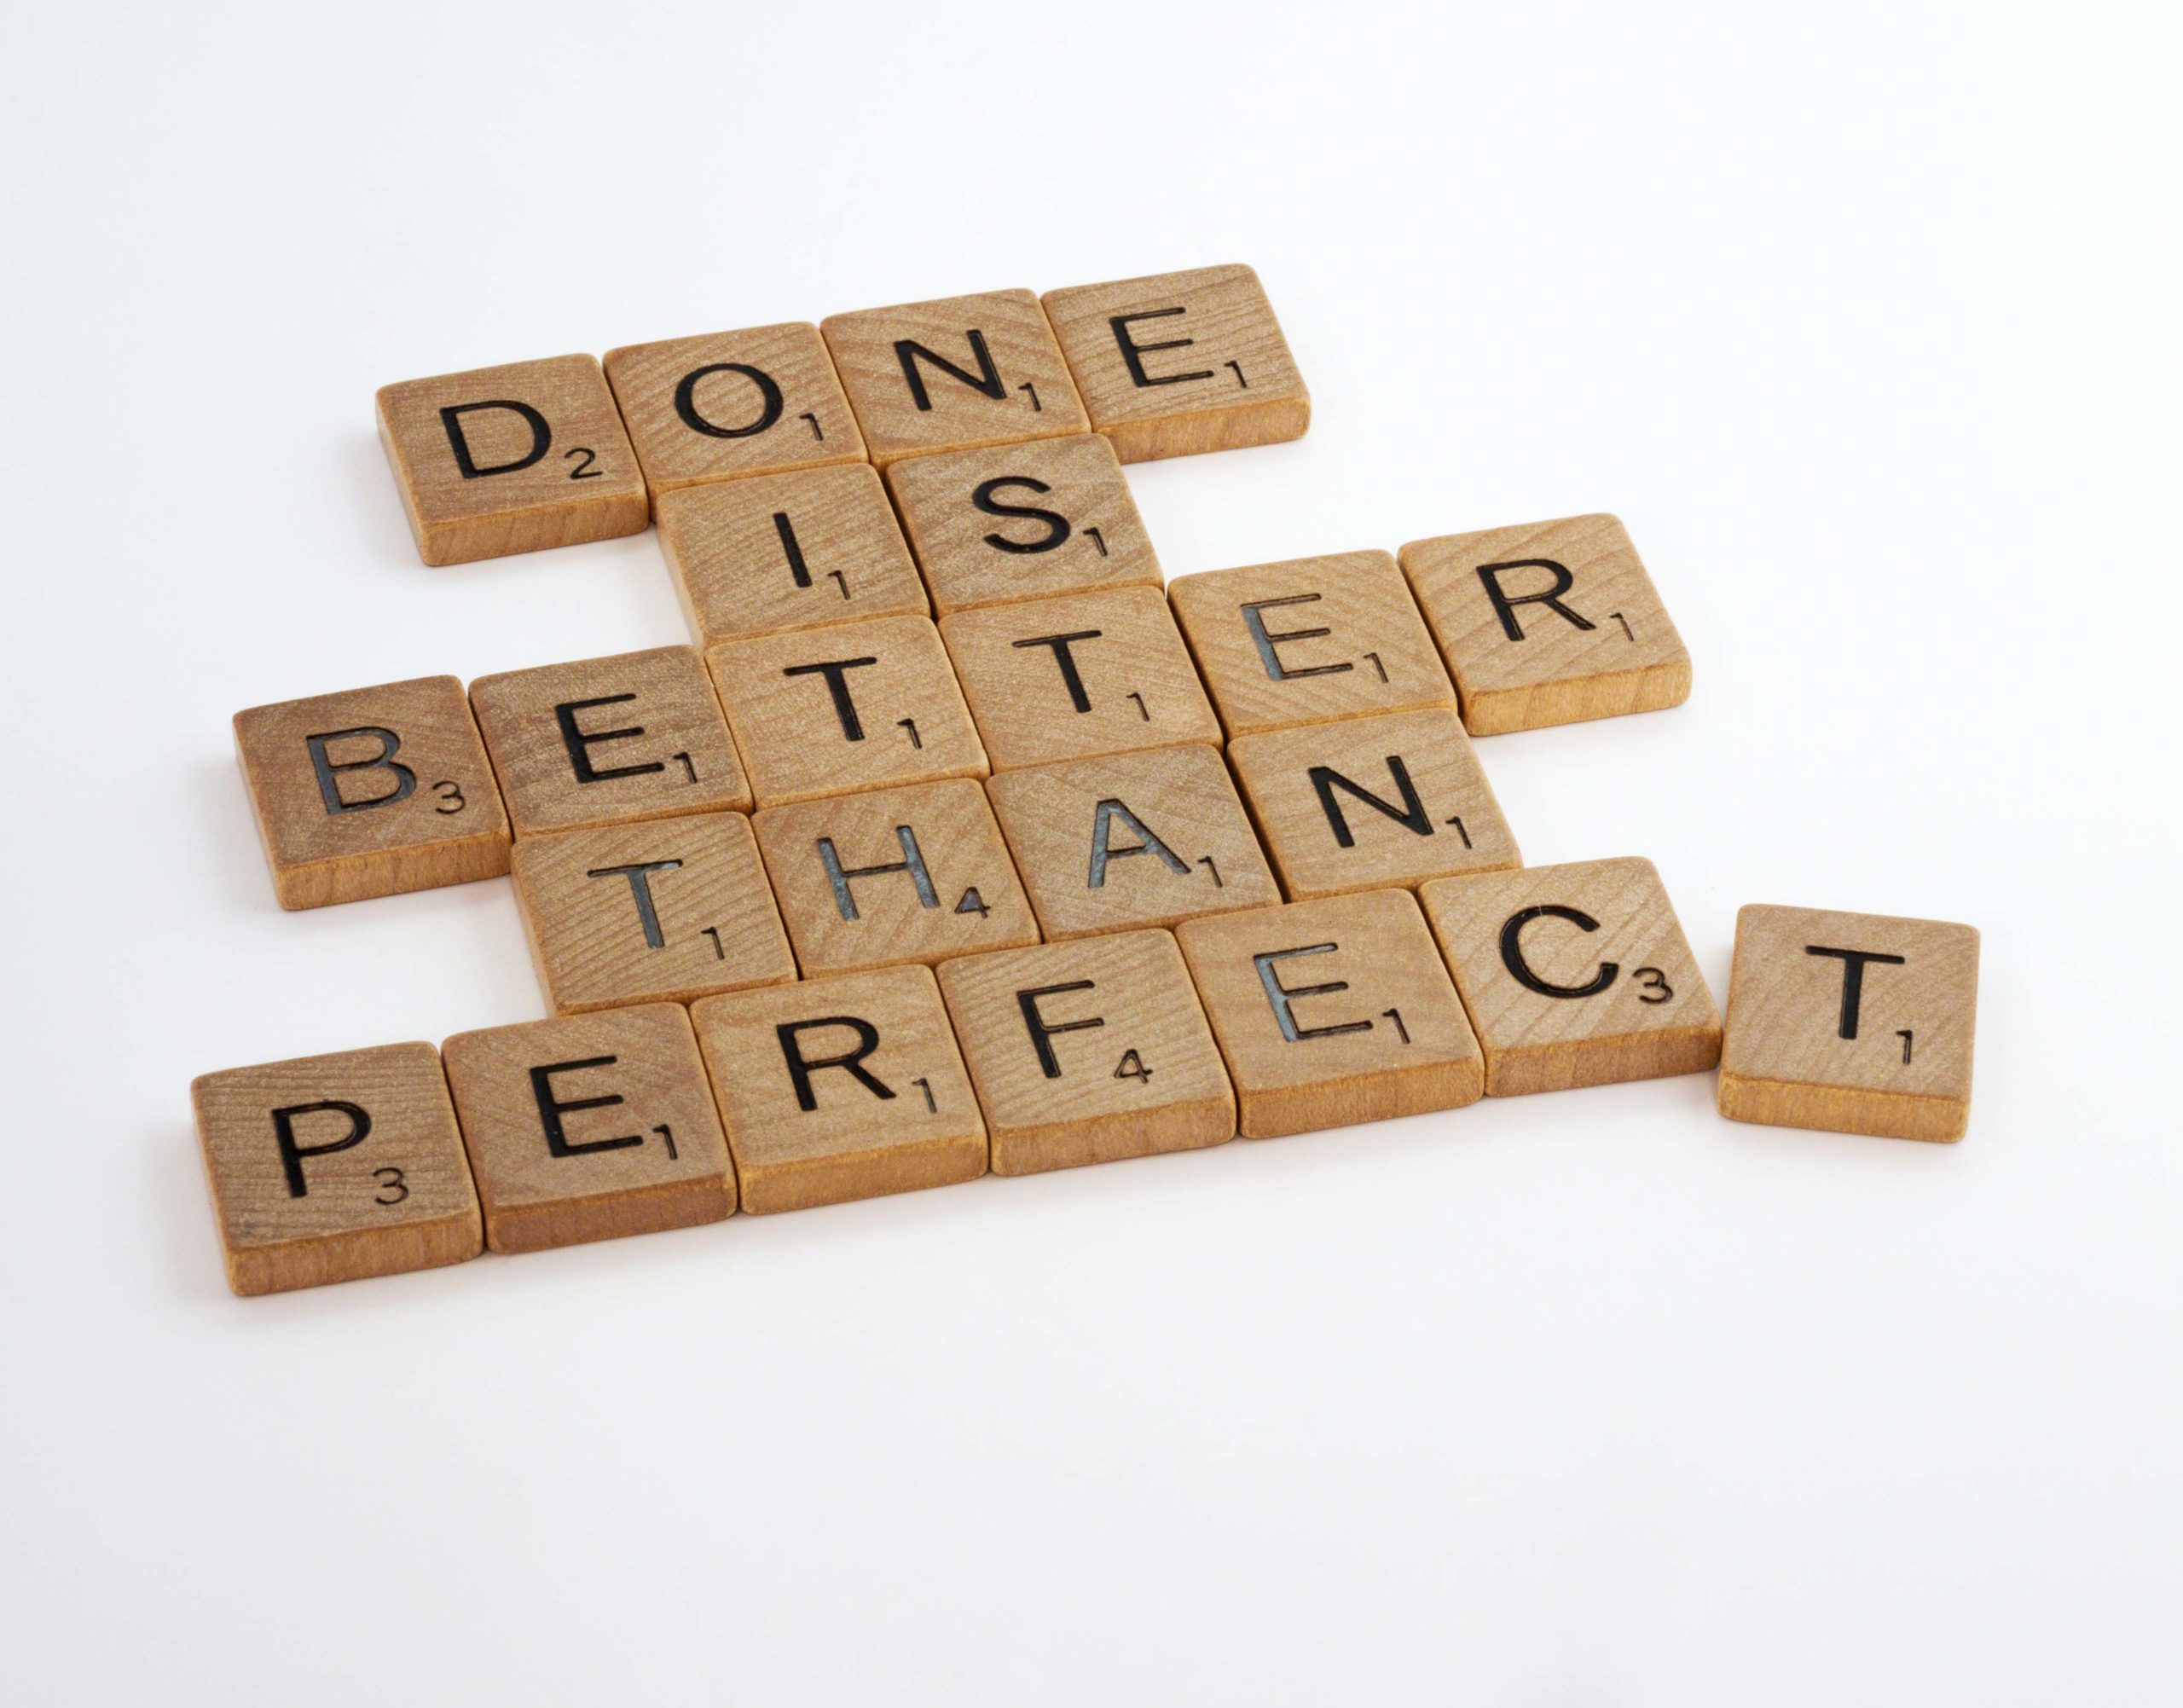 Scrabble tiles spelling out: Done Is Better Than Perfect